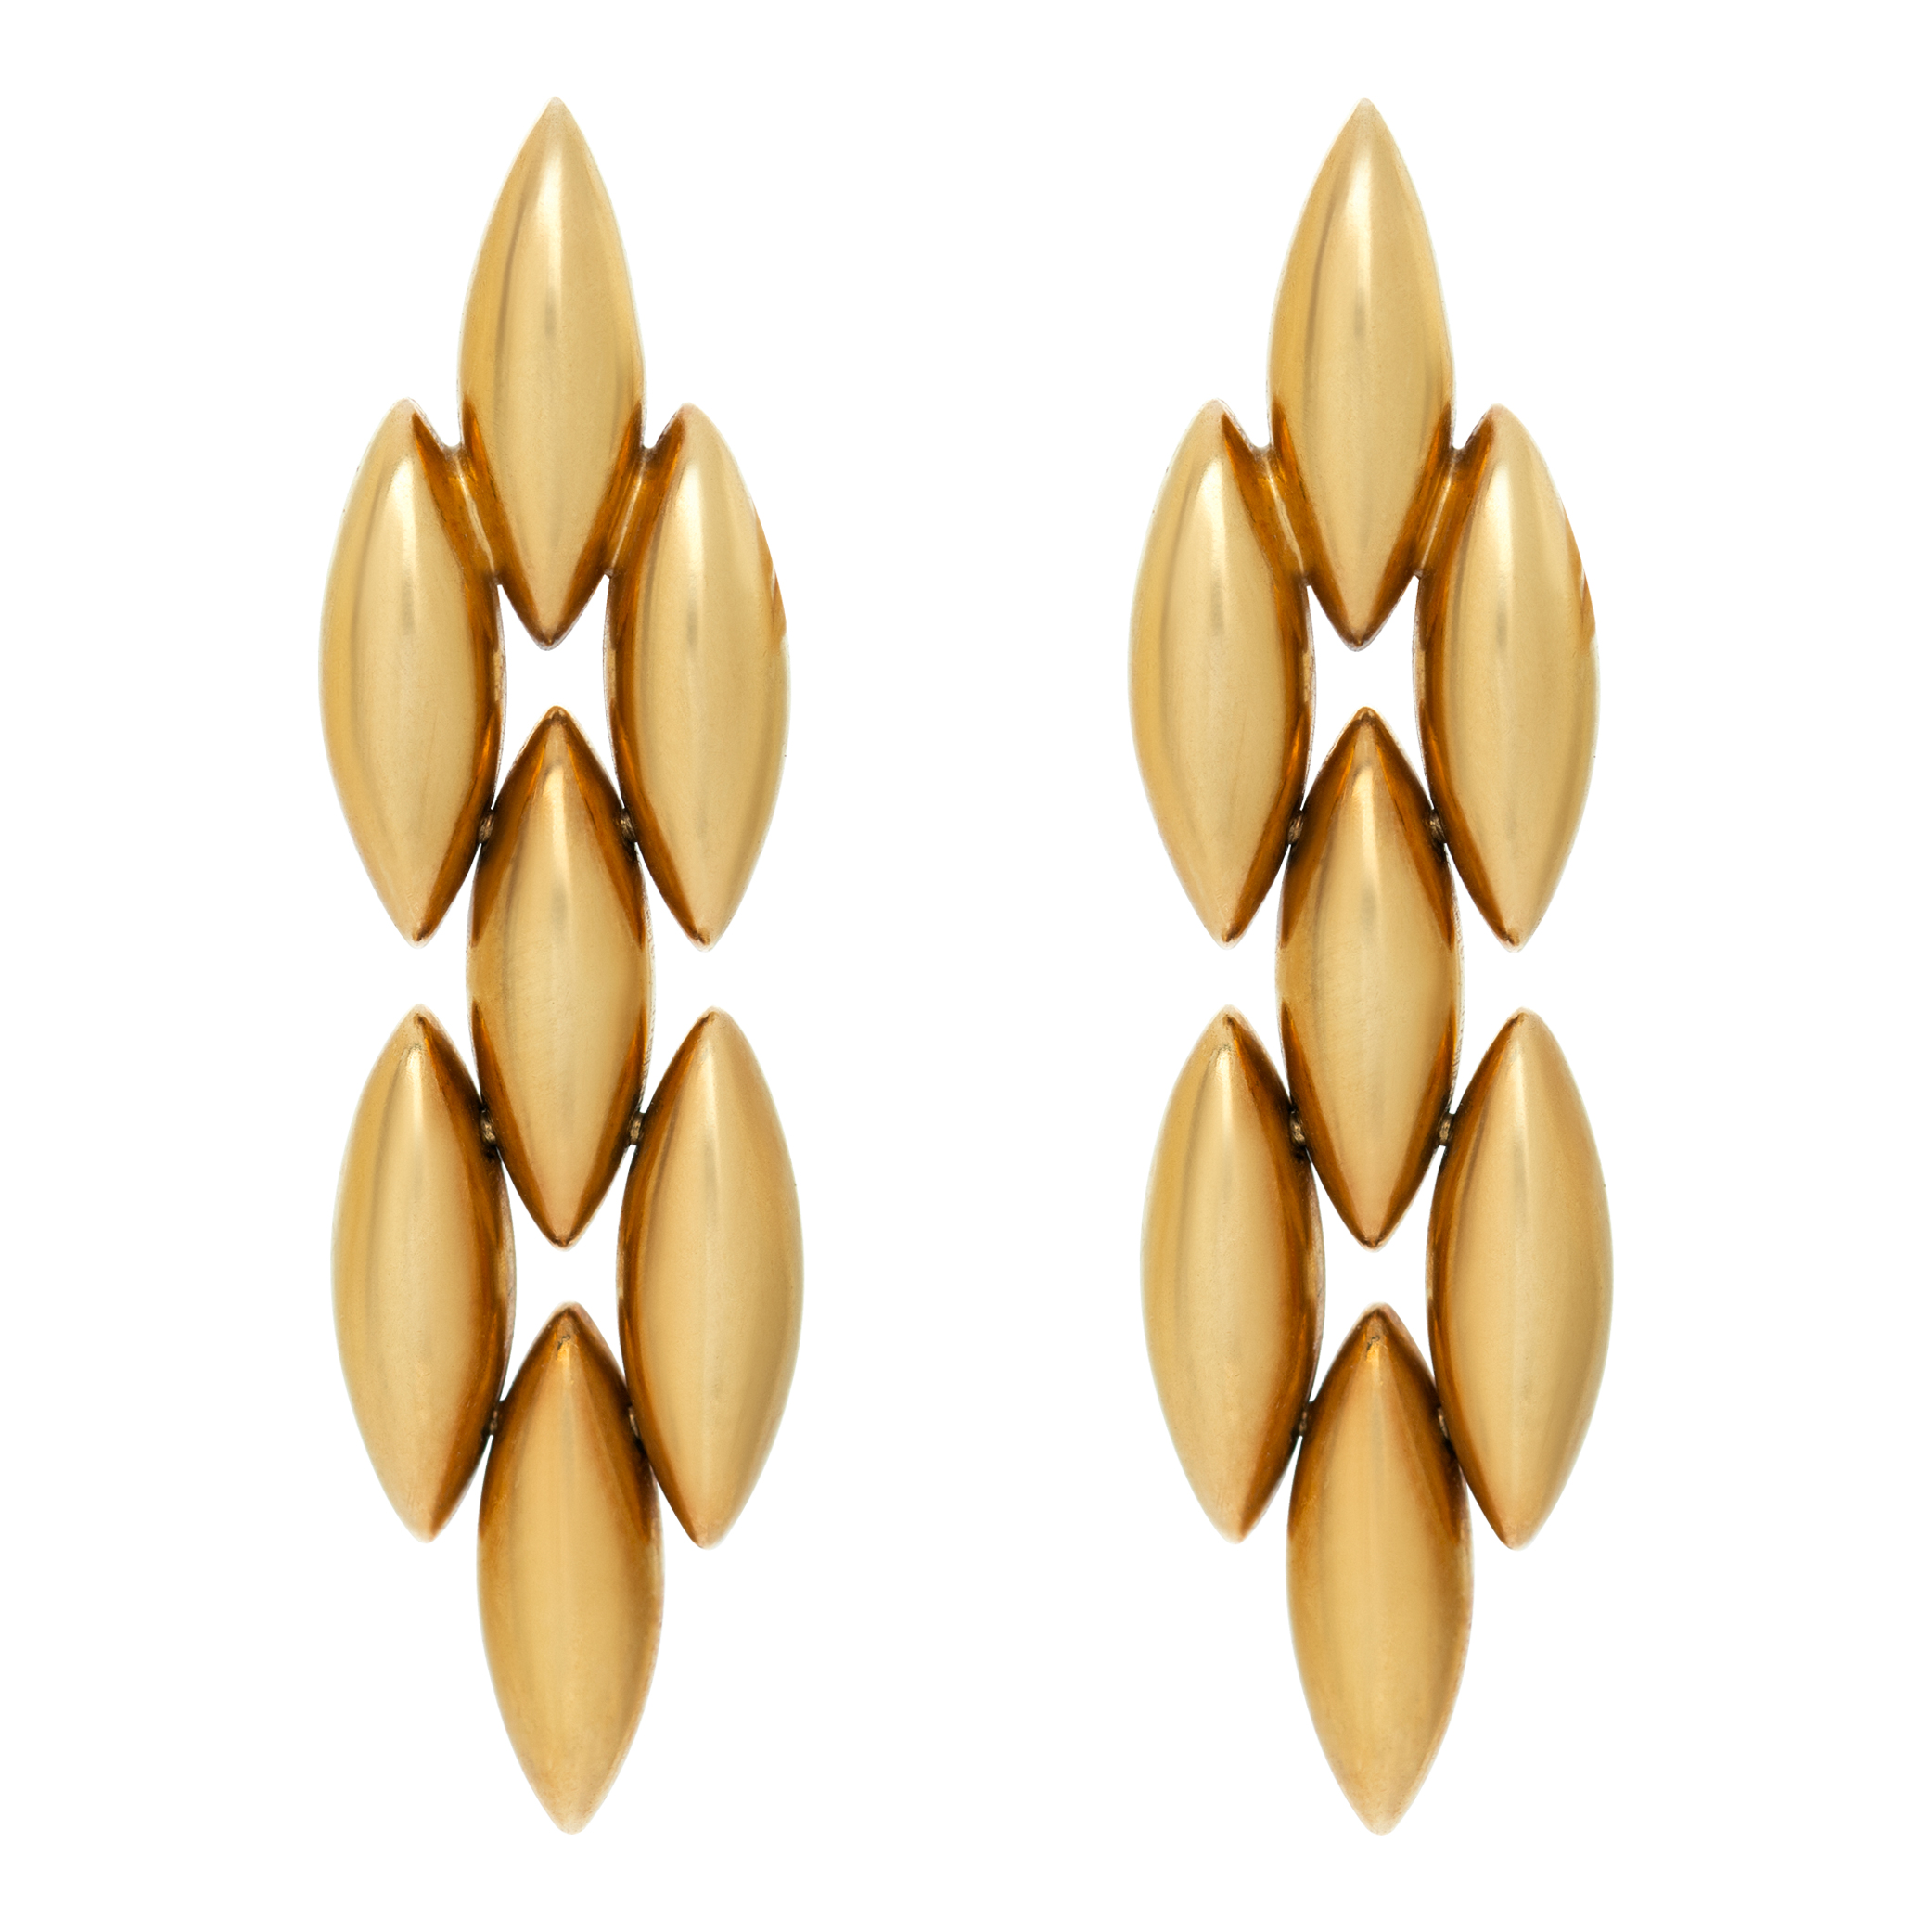 Cartier earrings in 18k yellow gold, length 1.6 inches